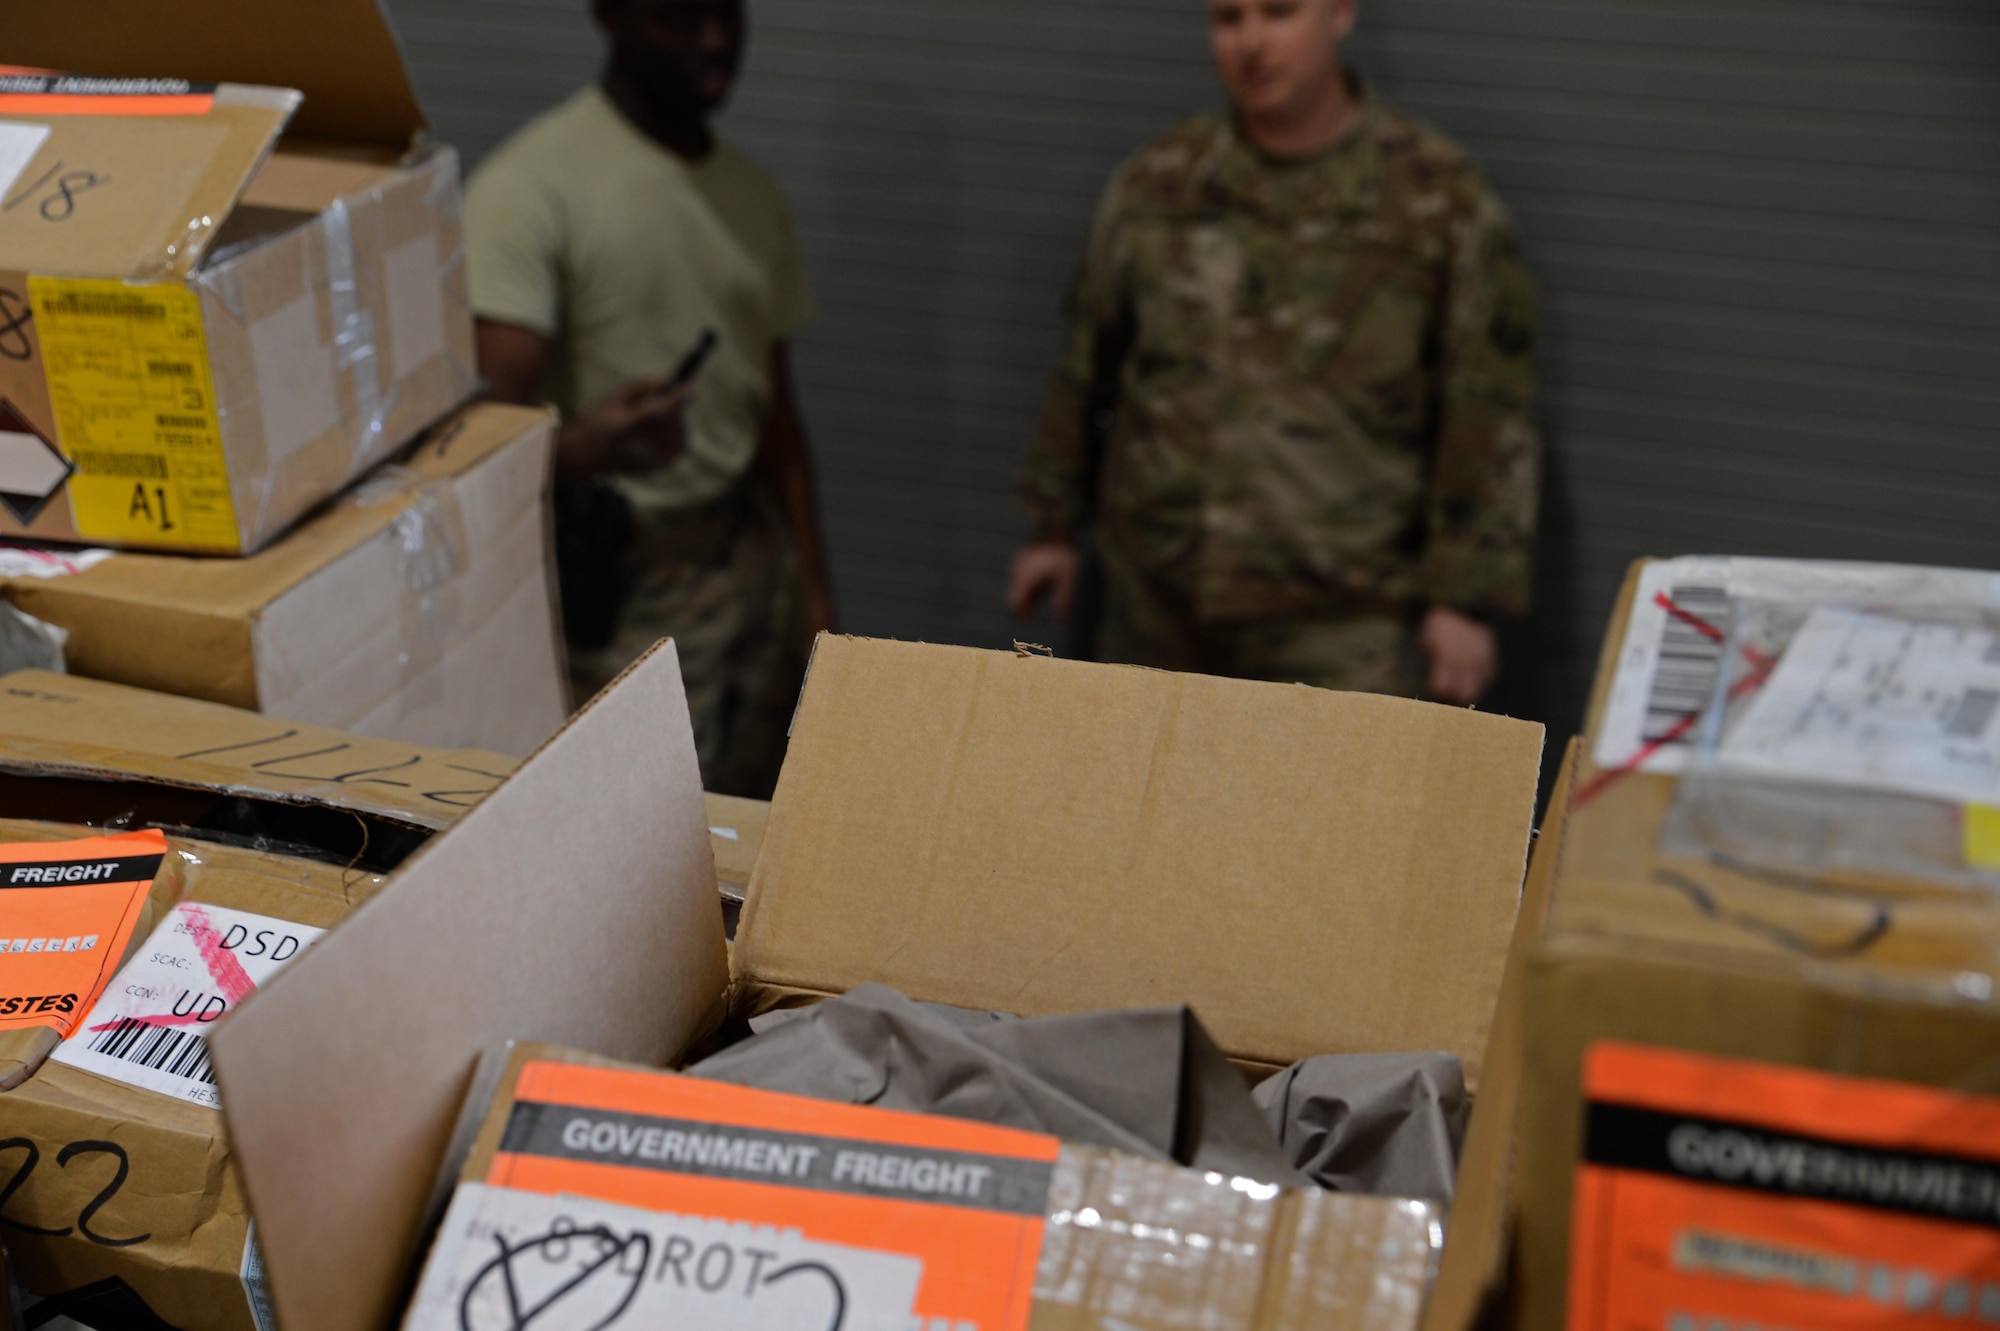 Shipment boxes are cleared and verified by inbound cargo Nov. 4, 2017 at Bagram Airfield, Afghanistan.